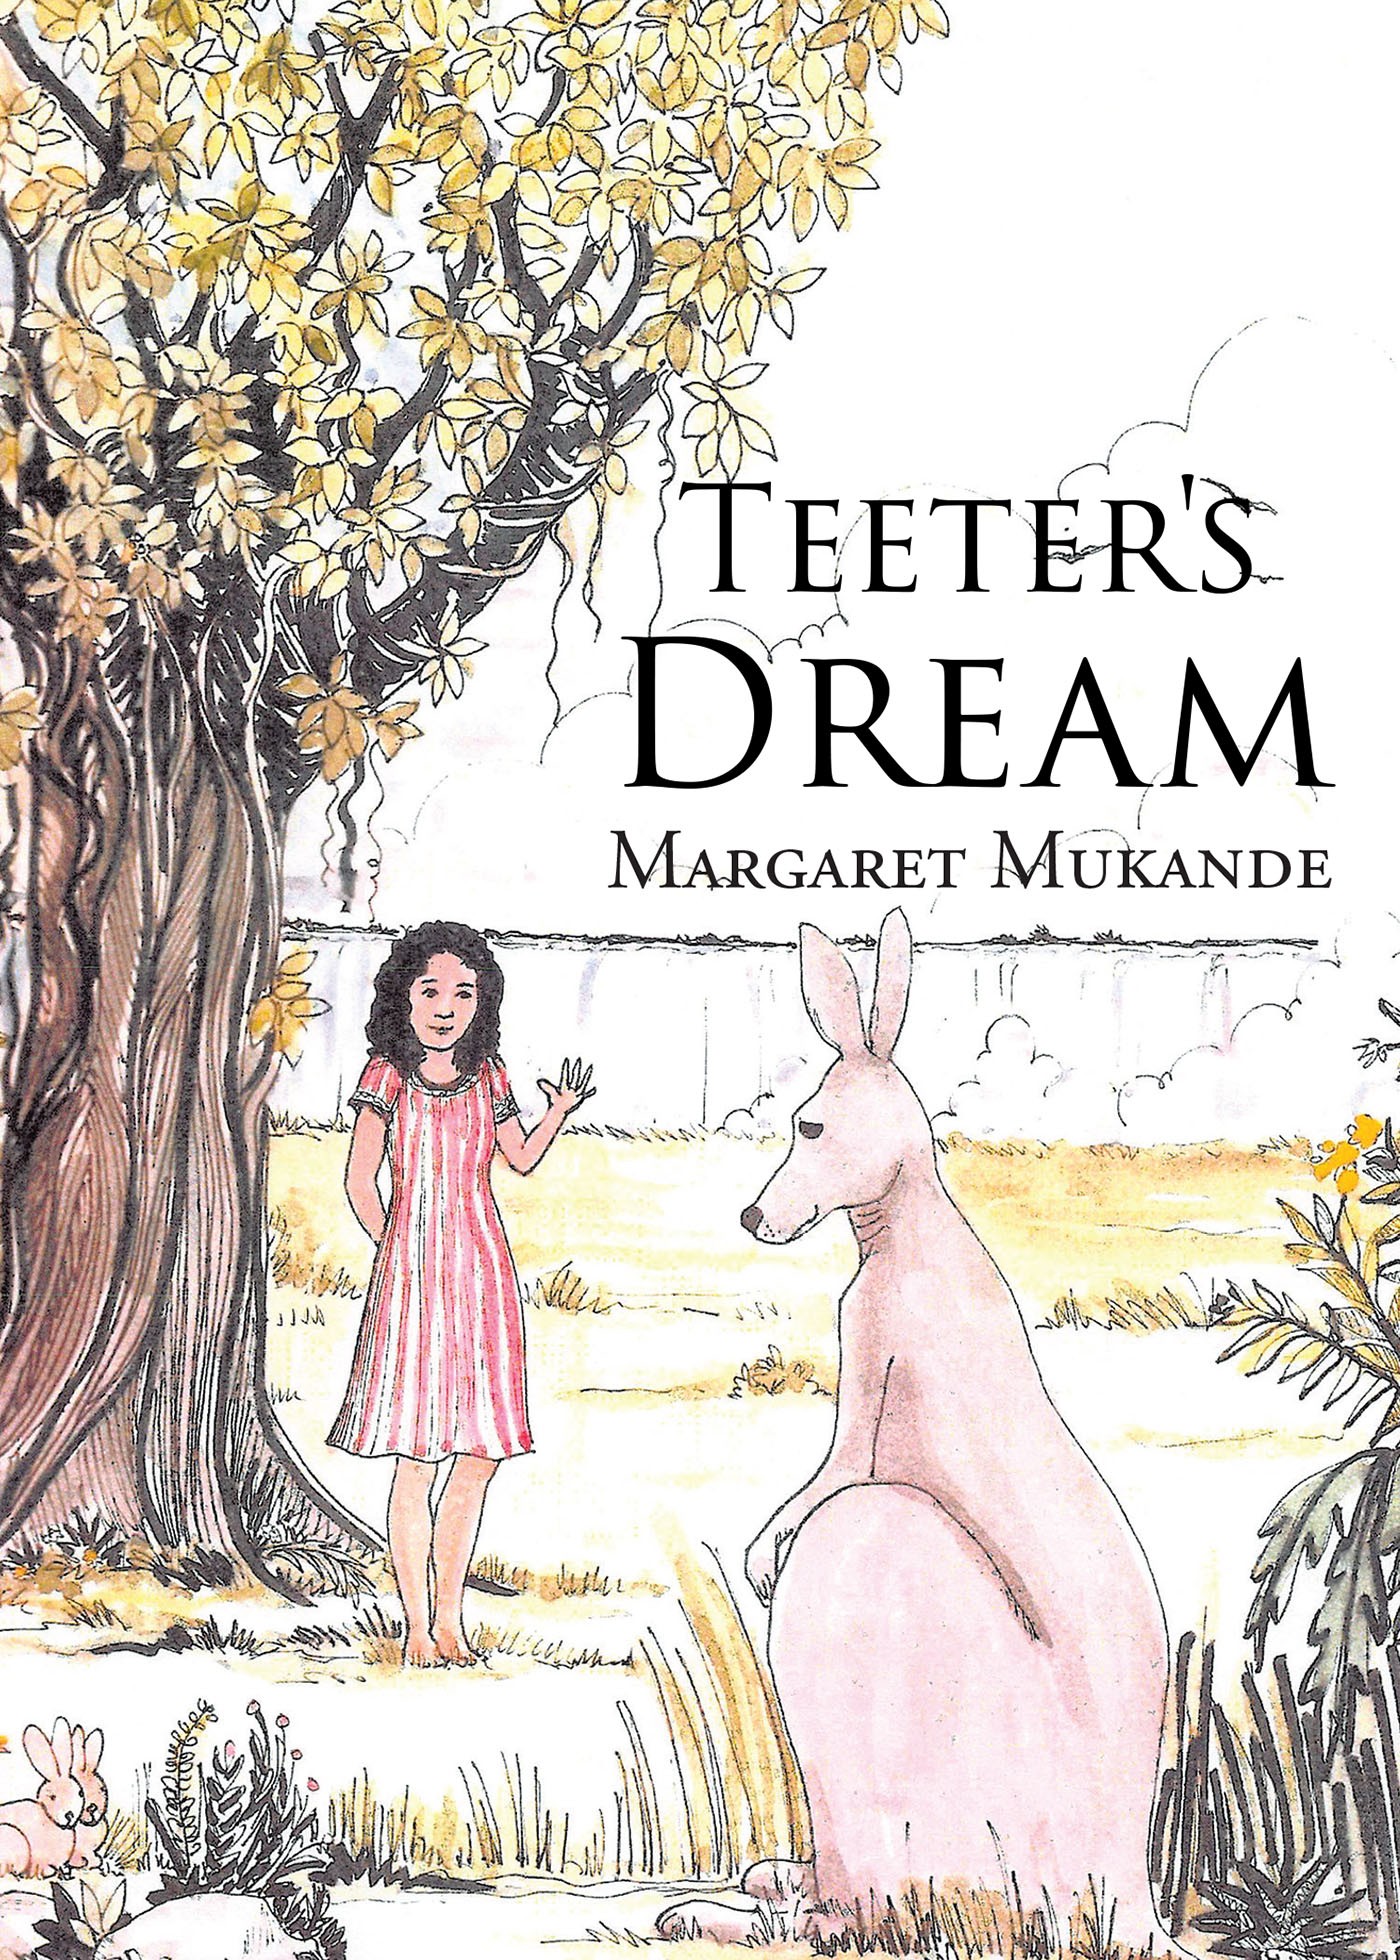 Author Margaret Mukande’s New Book, "Teeter’s Dream," is an Evocative Fantasy Underscoring the Societal Paradox Between the Treatment of Pet Animals & Their Wild Cousins